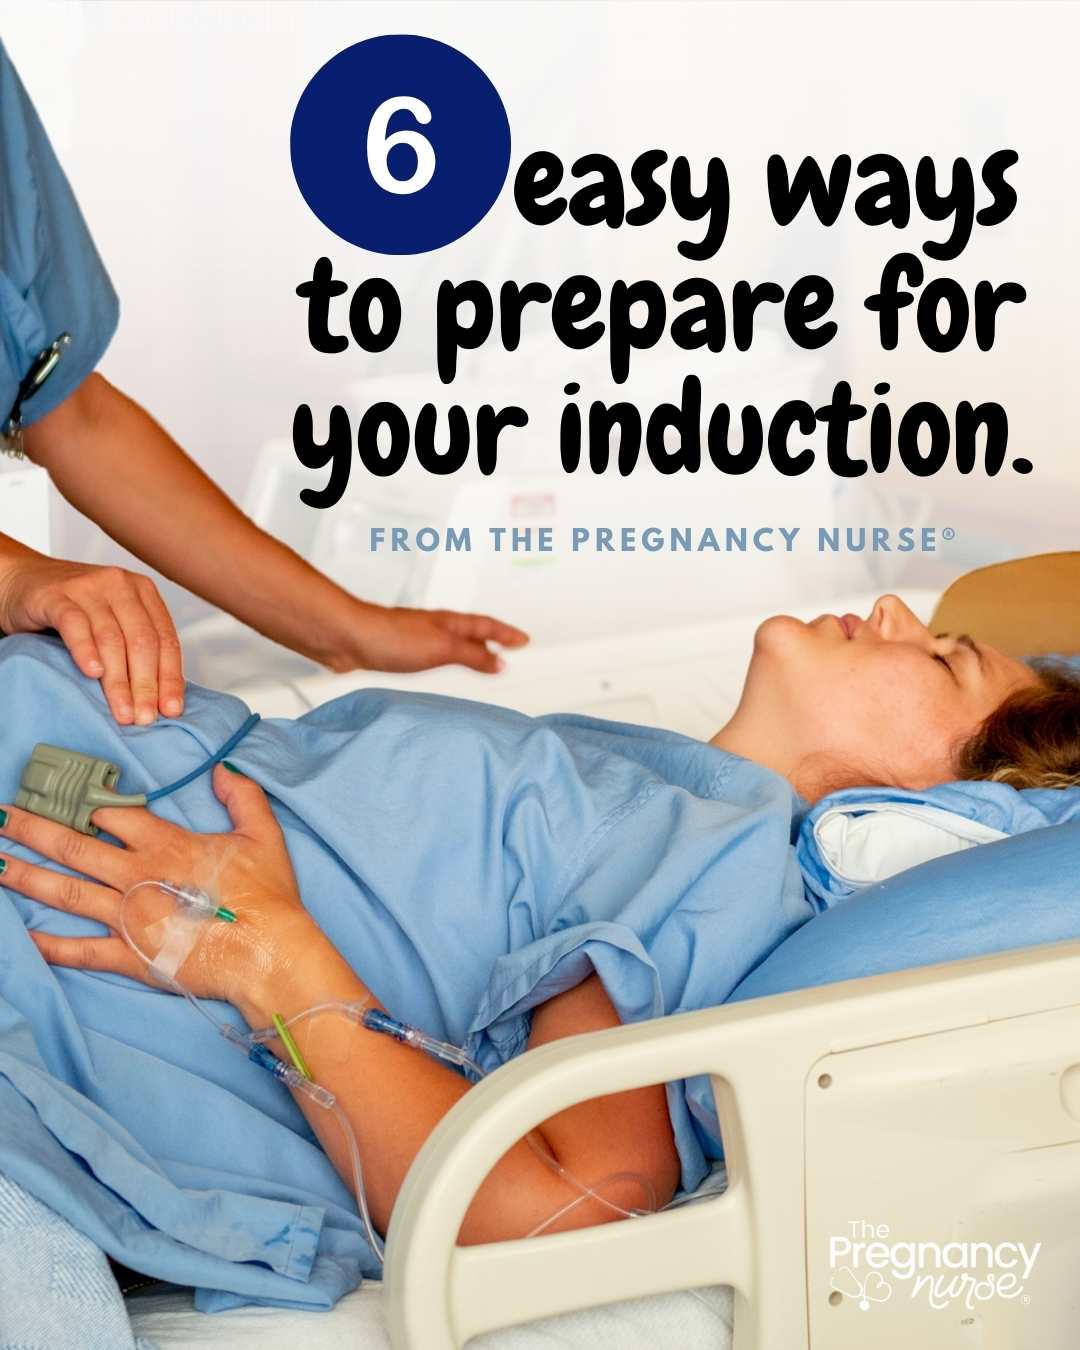 How to Prepare for an Induction